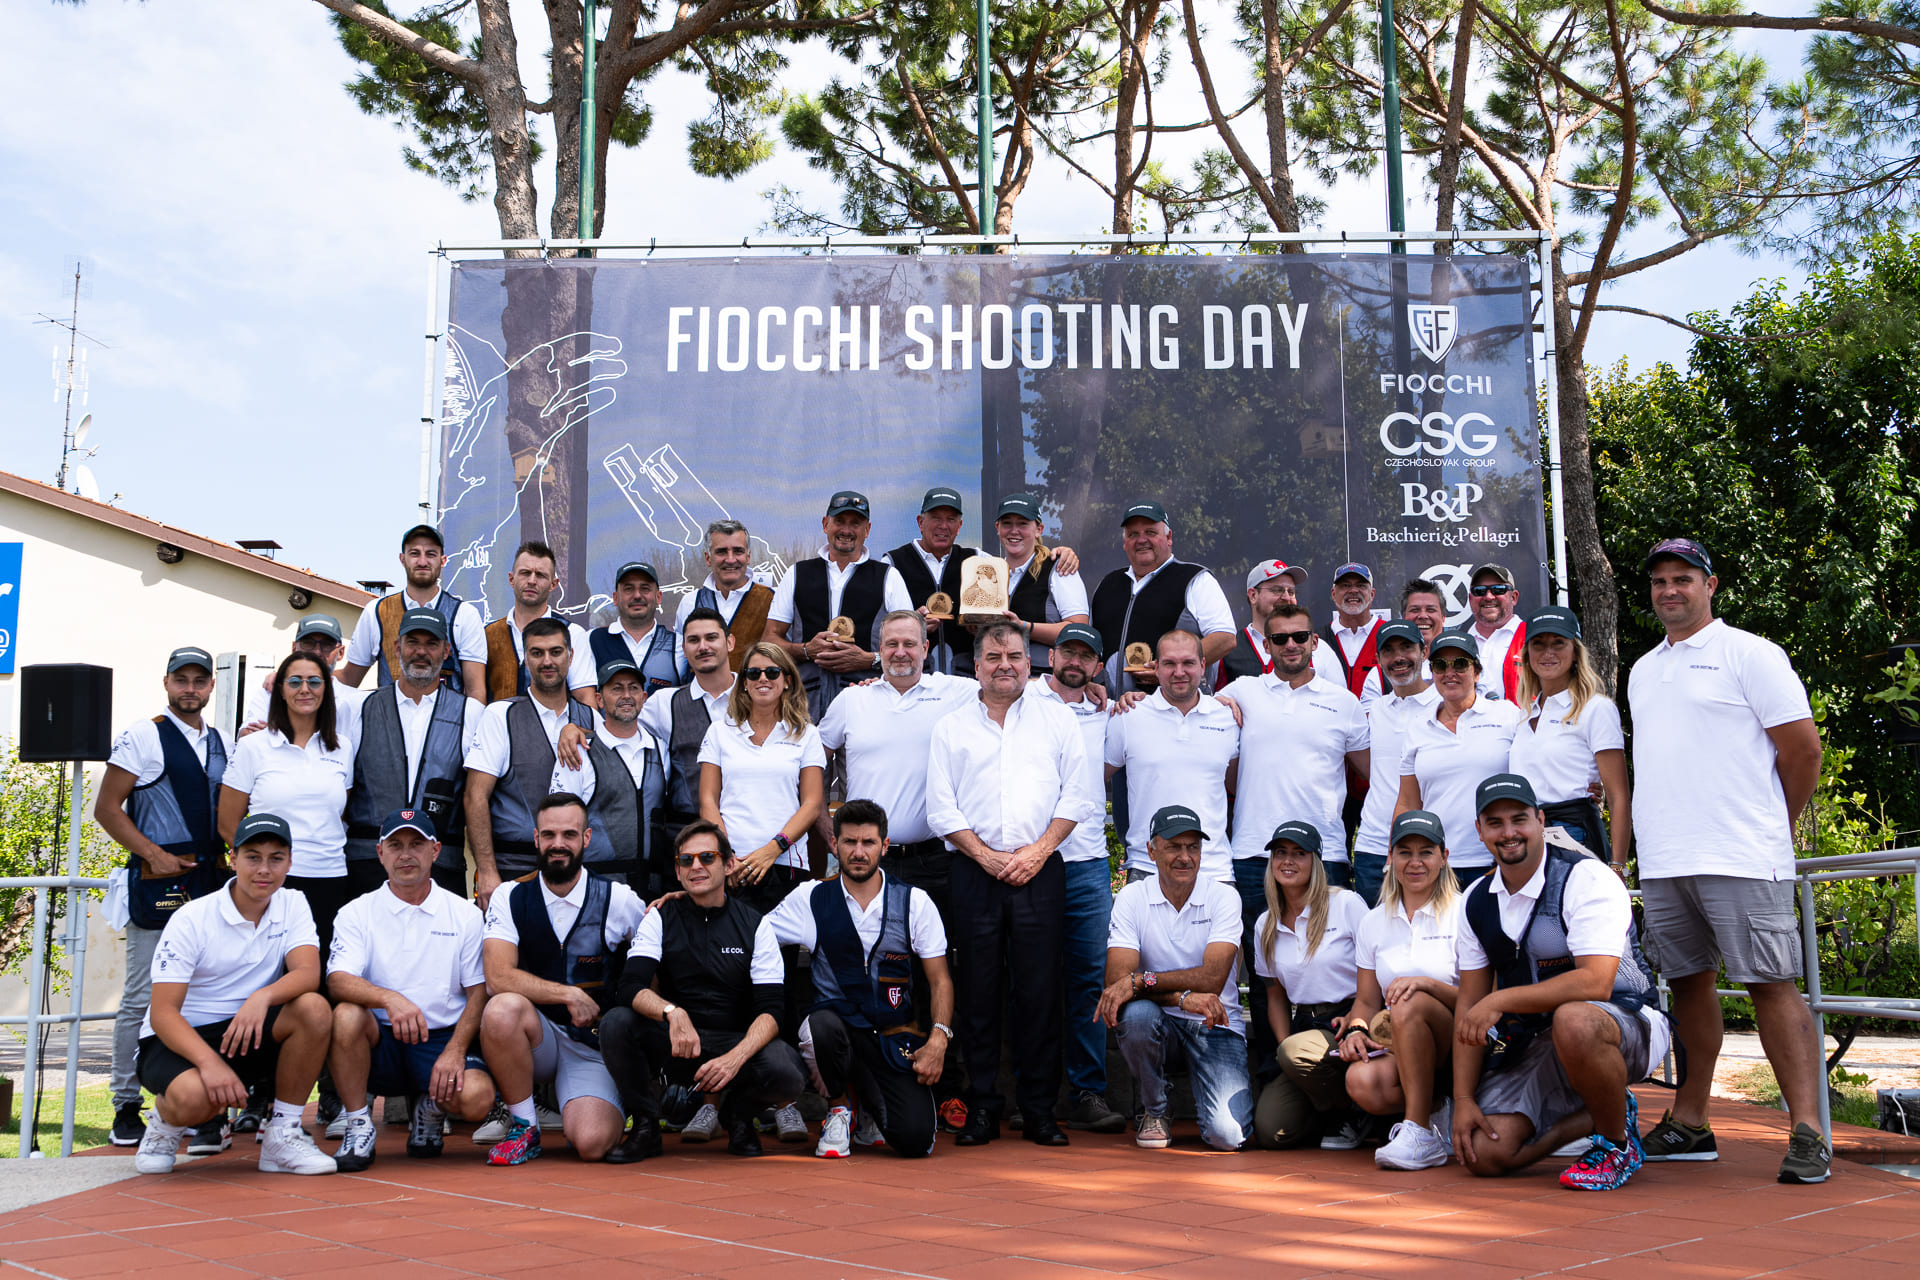 A CELEBRATION OF TEAM SPIRIT: THE FIOCCHI SHOOTING DAY